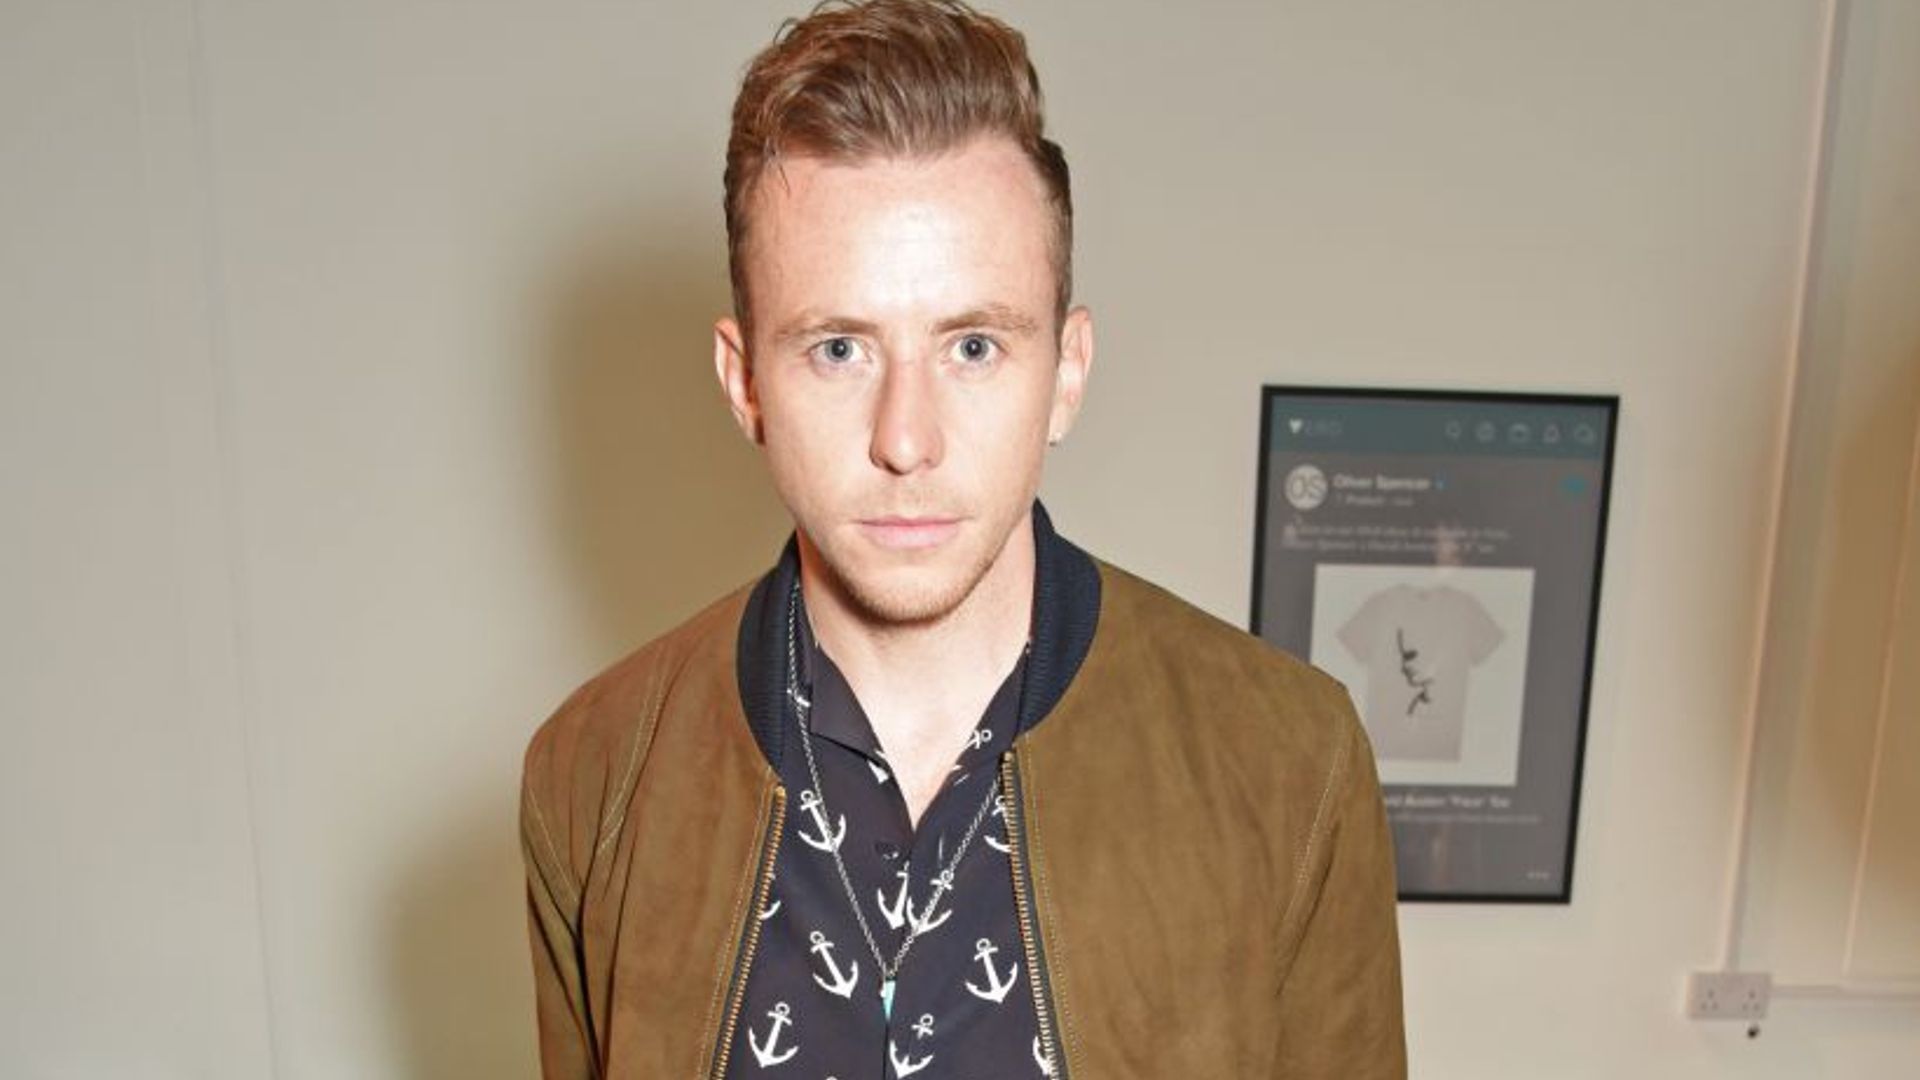 Danny Jones has shared some sad news with fans